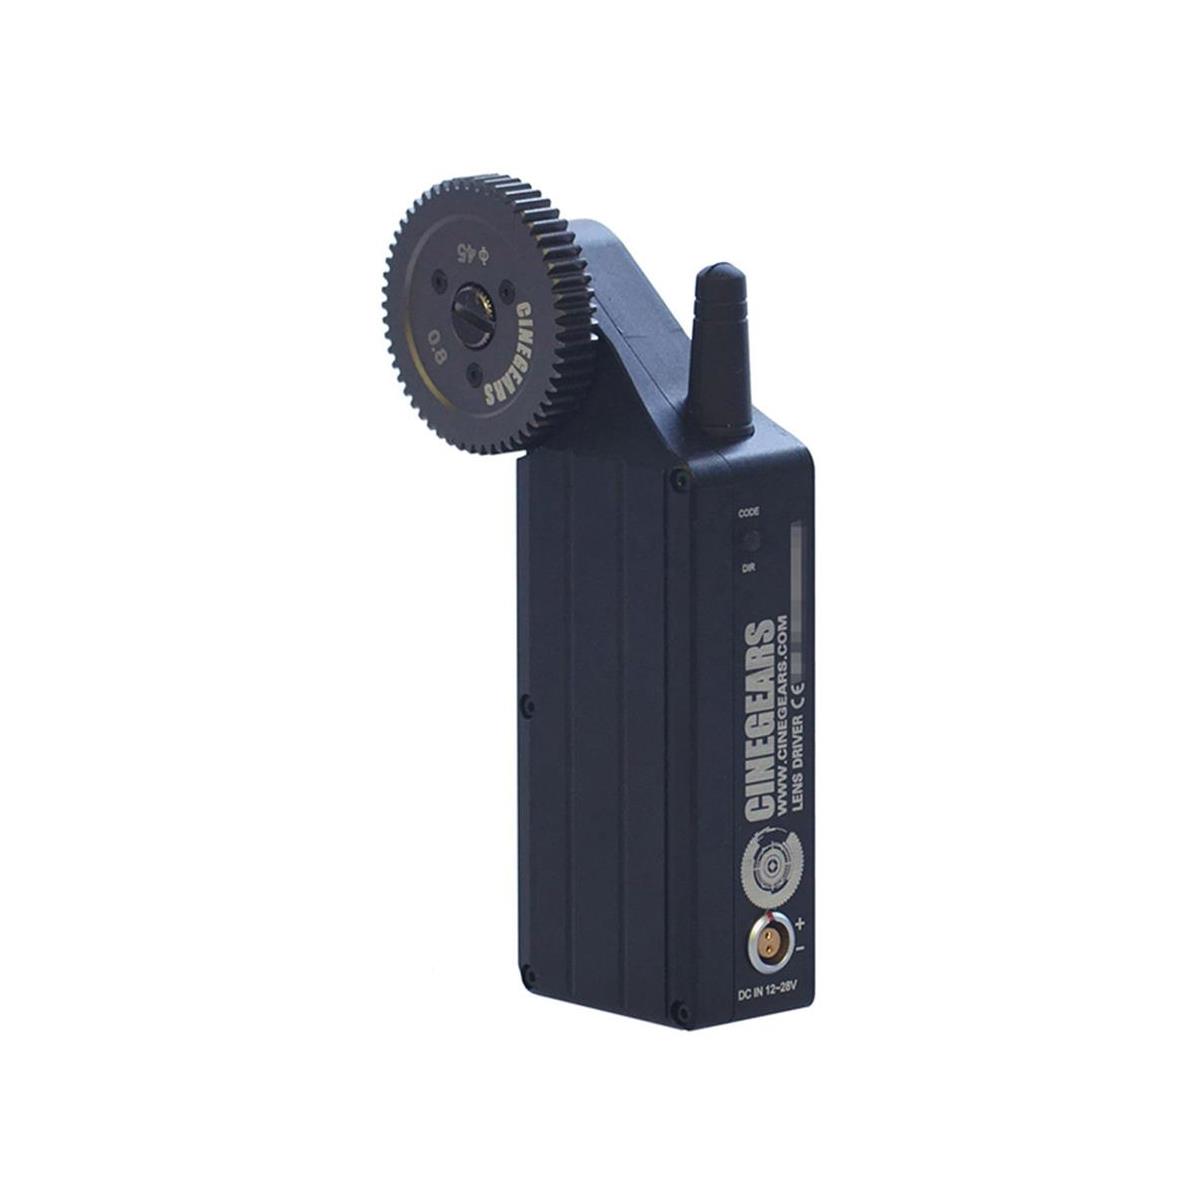 Image of Cinegears Single-Axis Wireless Motor with Built-In Wireless Antenna